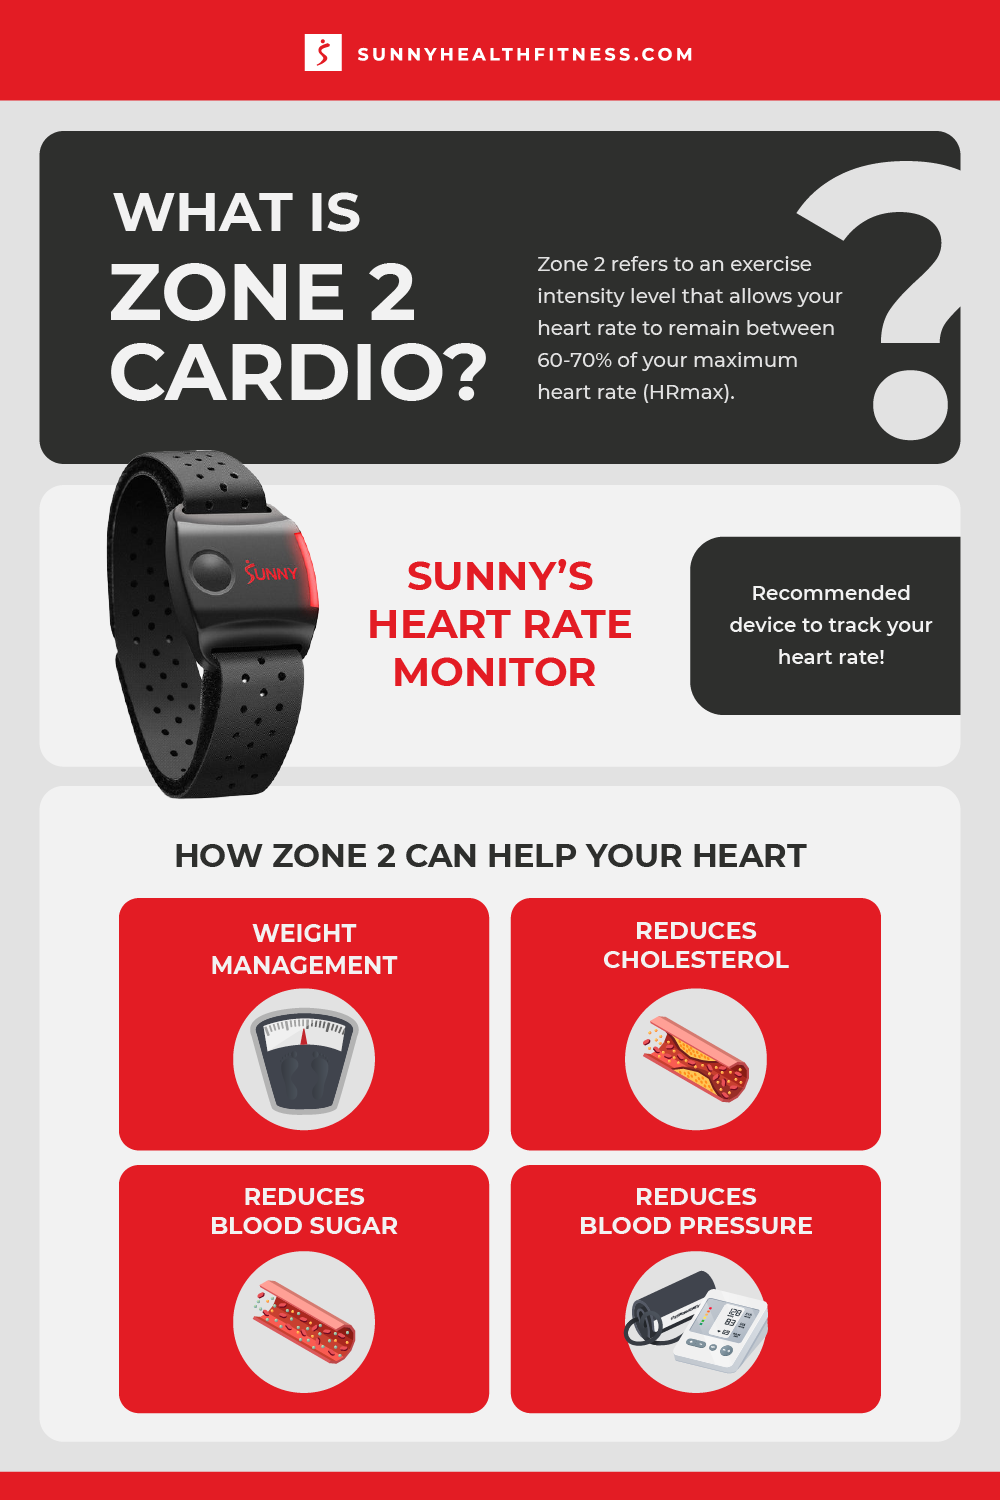 Zone 2 Cardio & Your Heart Infographic